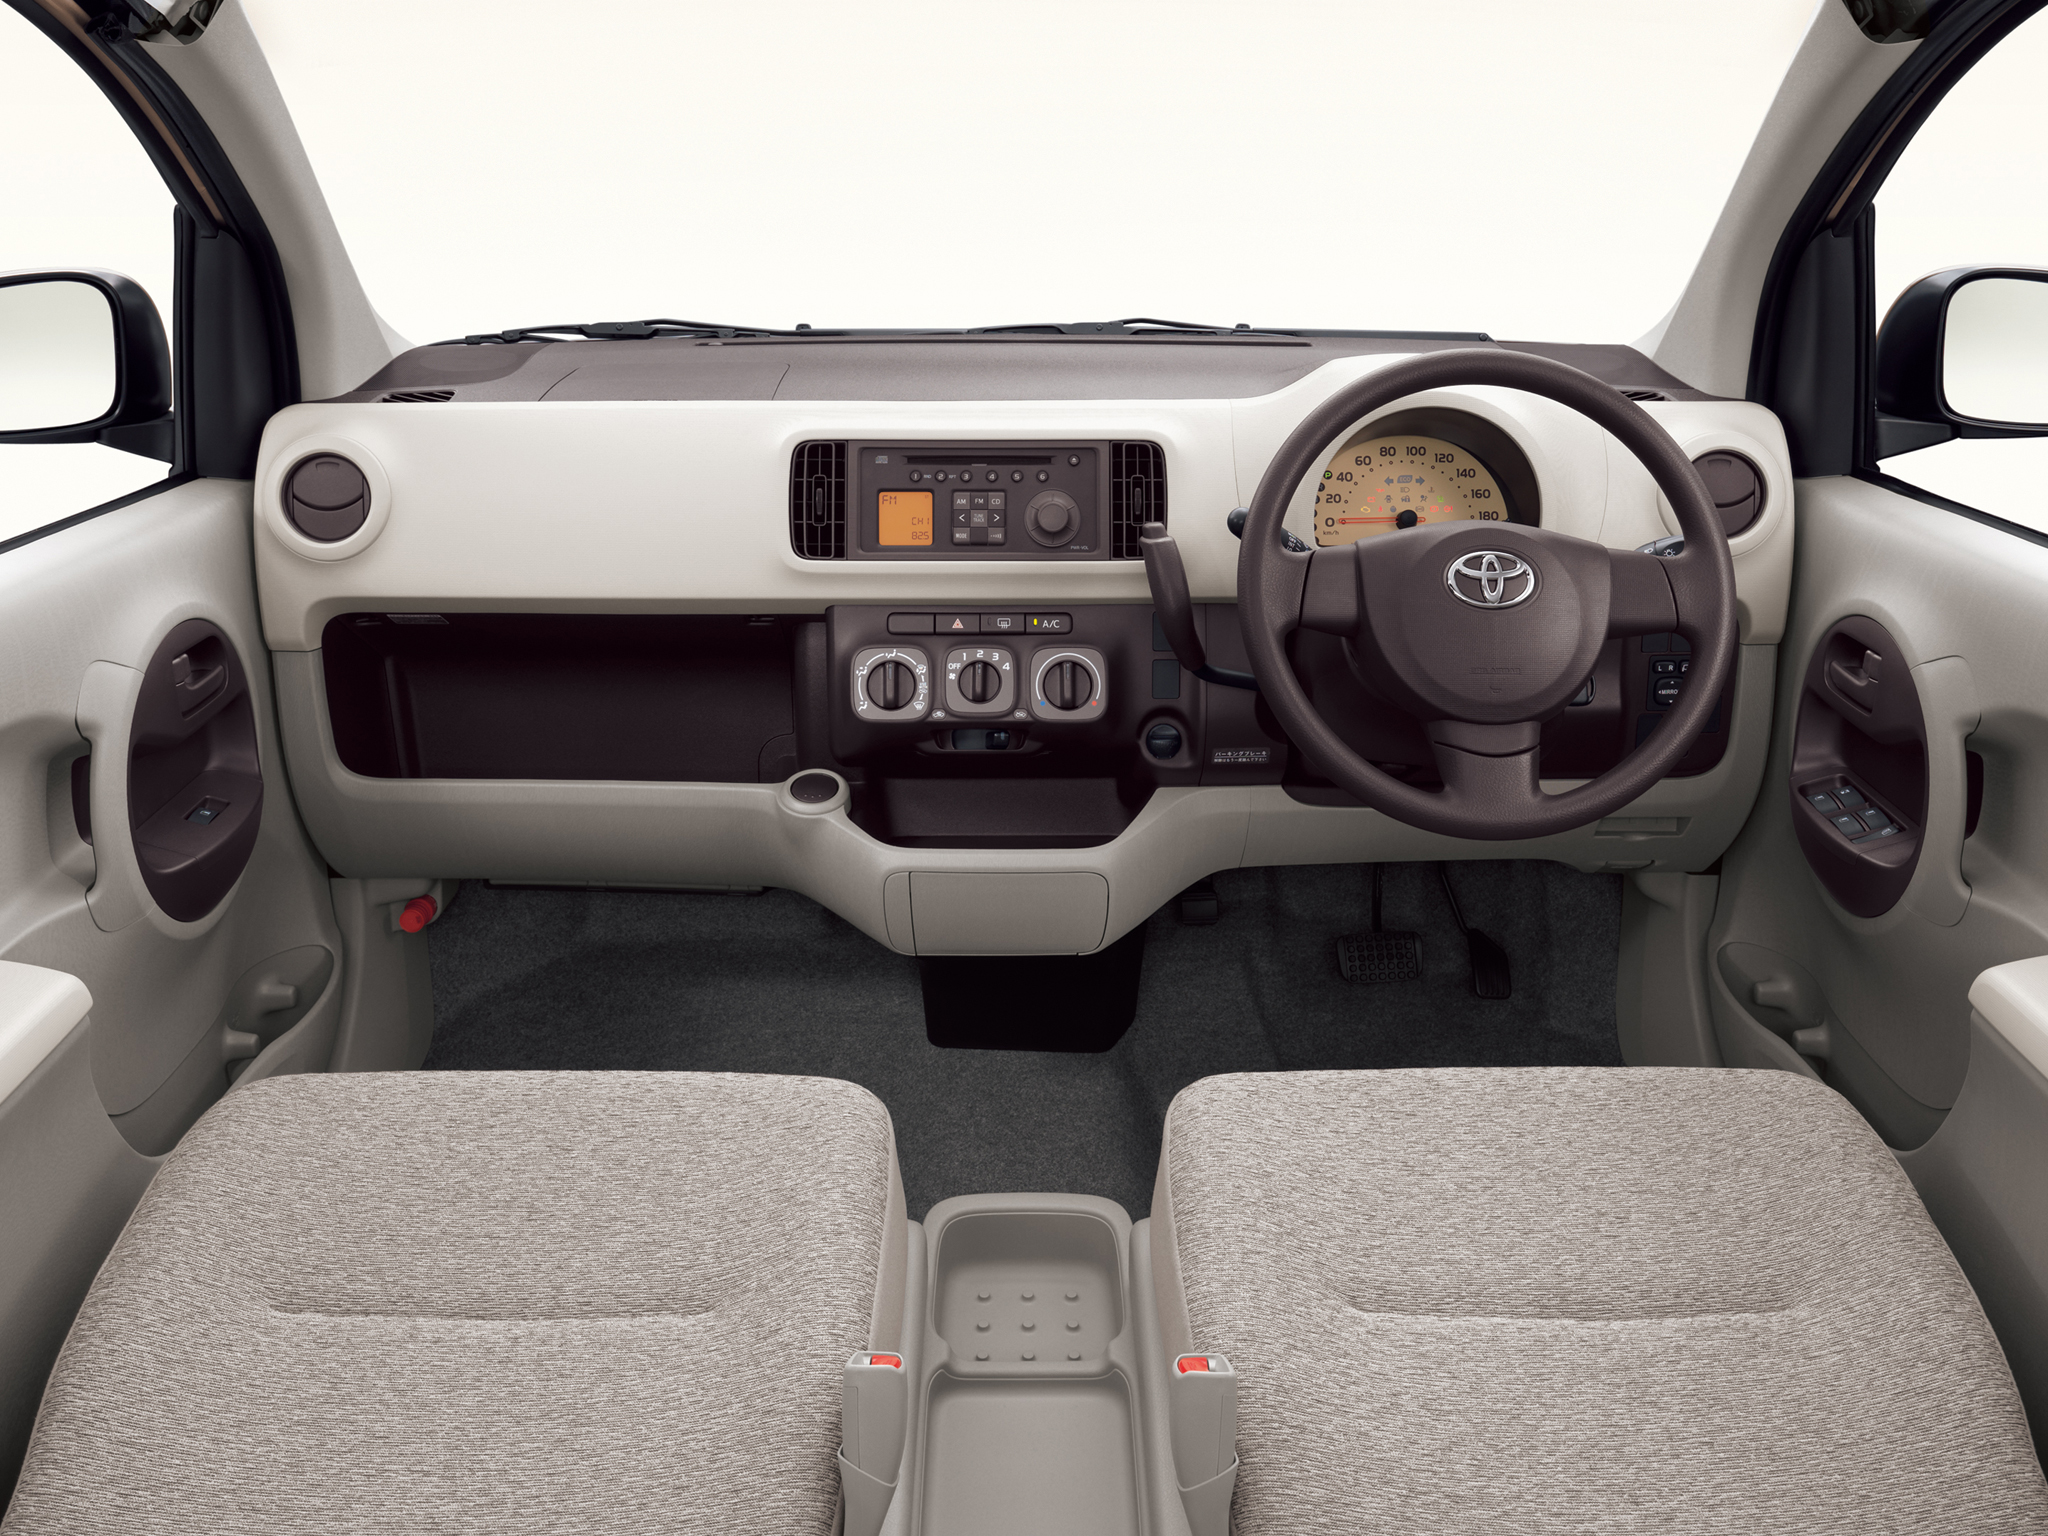 Toyota Passo Prices in Pakistan, Pictures and Reviews 